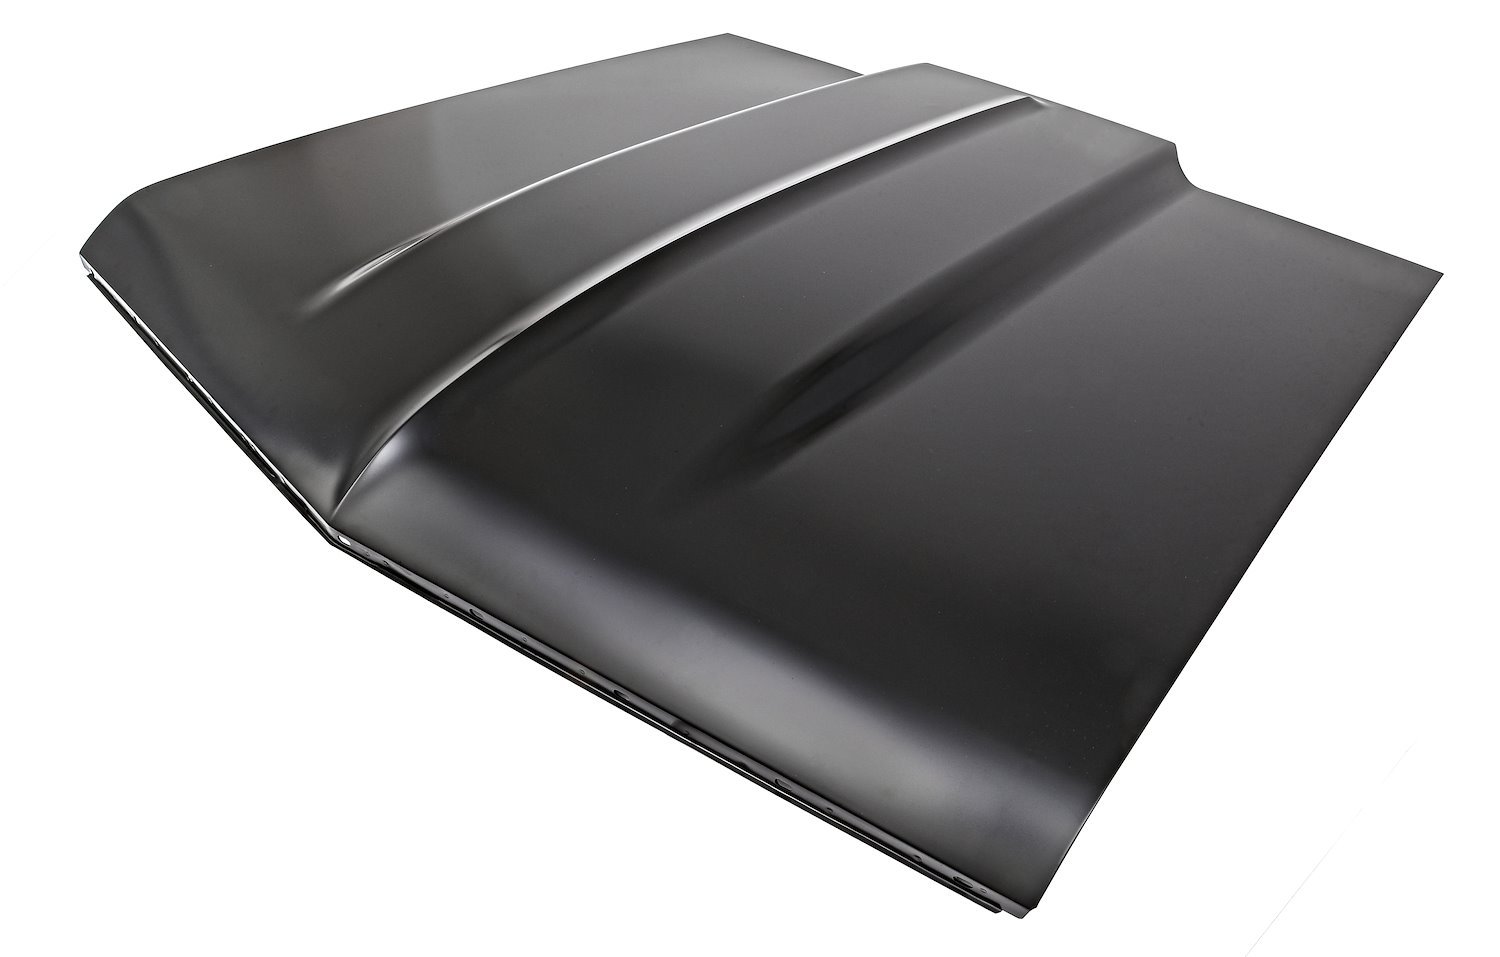 Steel Cowl Induction Hood for 1967 Chevrolet Chevelle